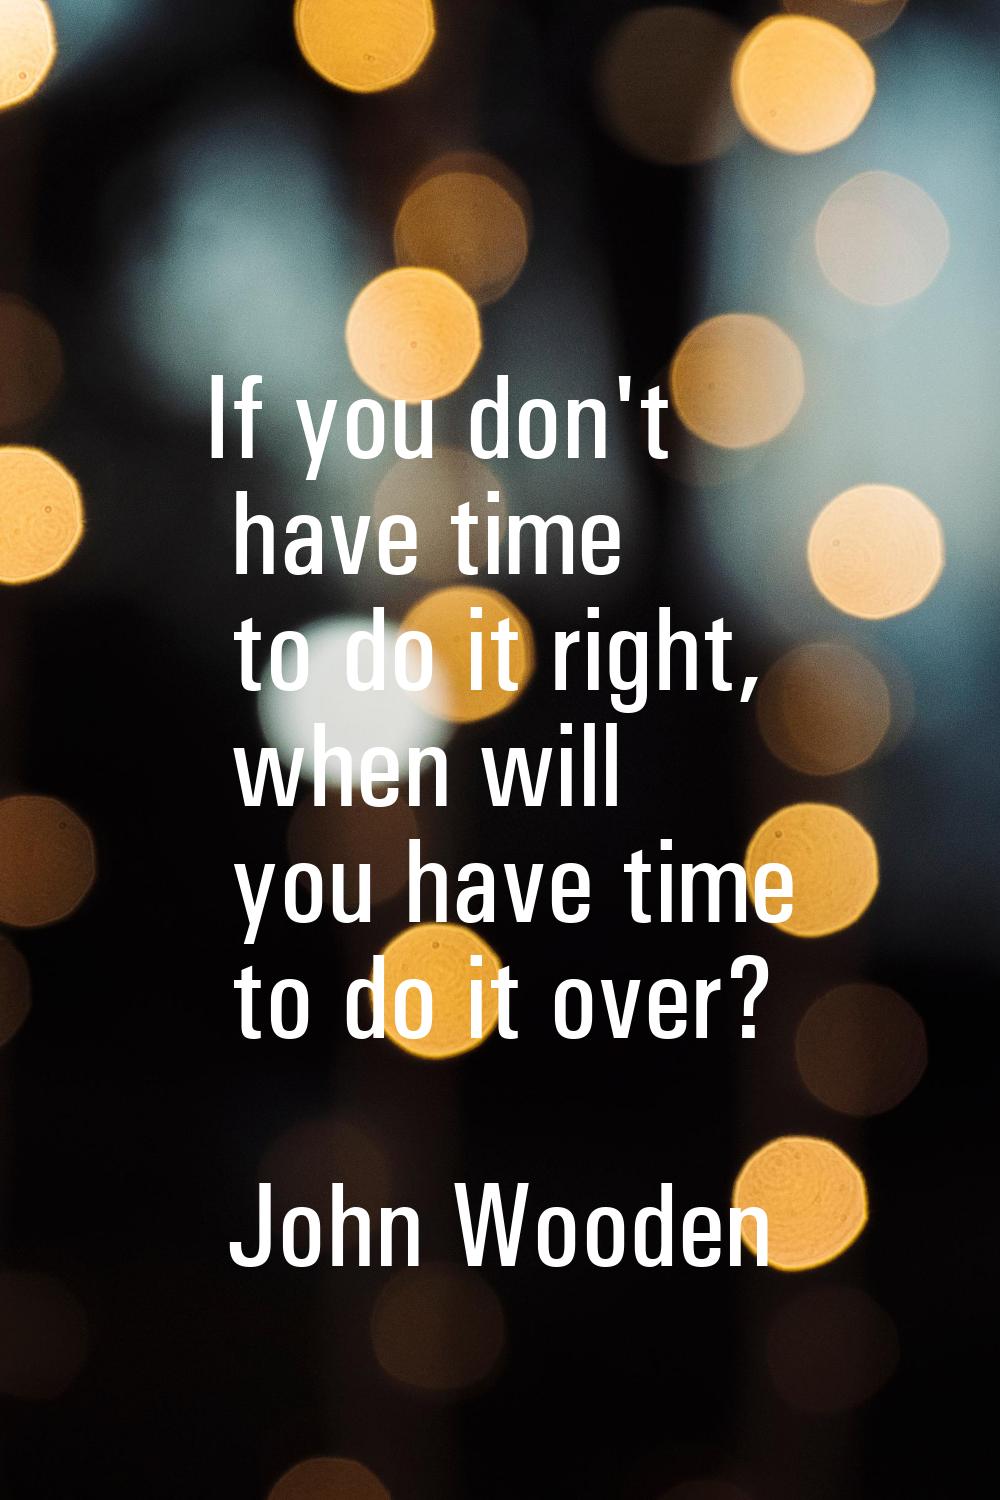 If you don't have time to do it right, when will you have time to do it over?